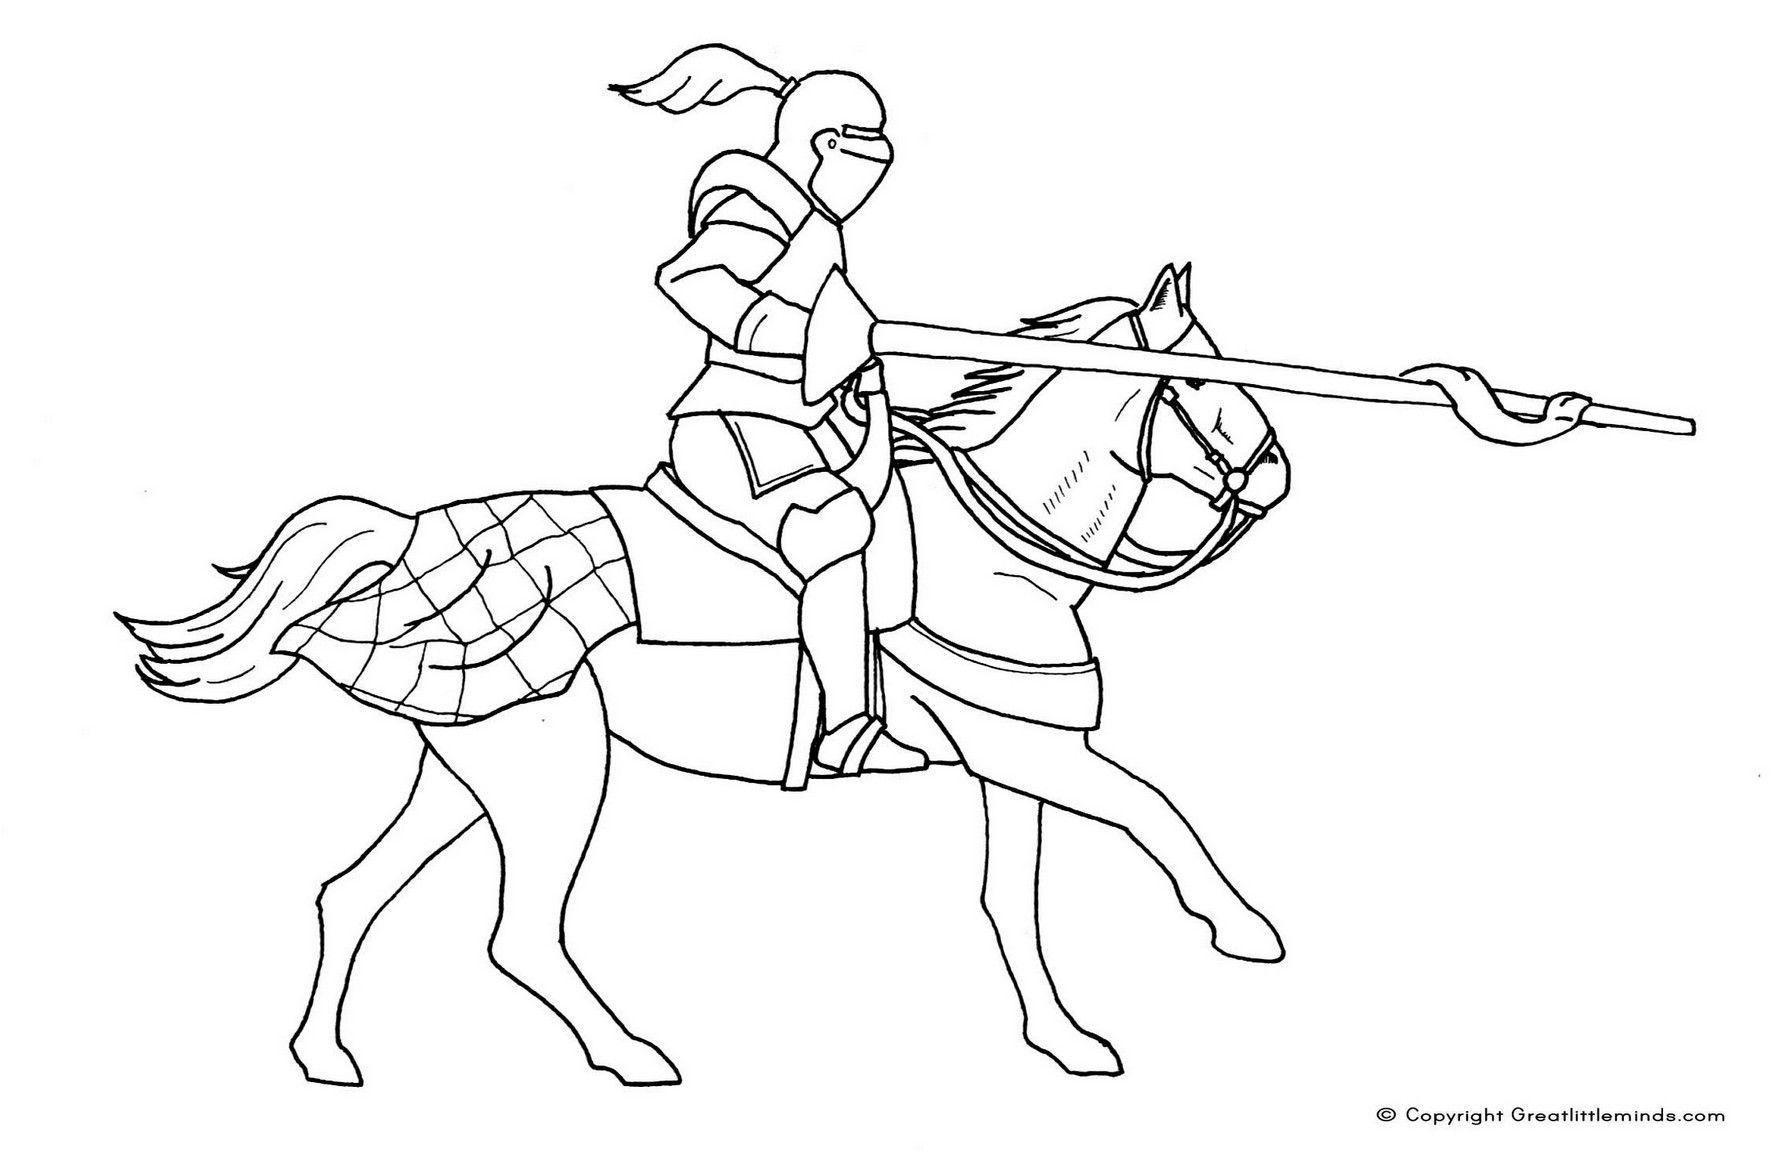 Coloring page knights free horse coloring pages coloring pages knight on horse